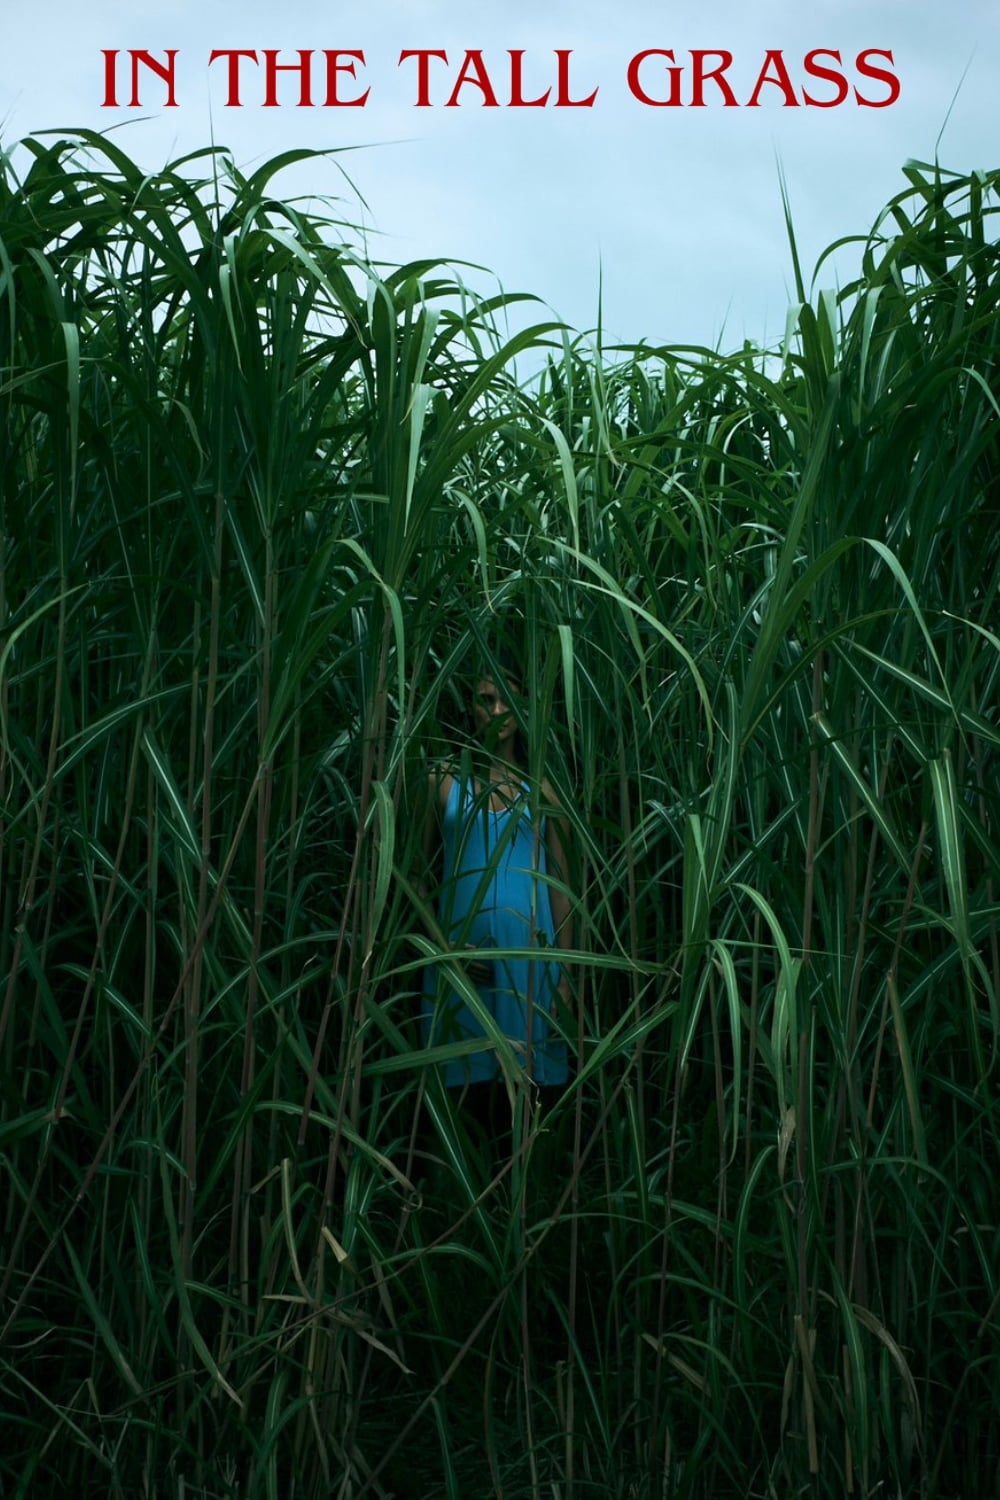 IN THE TALL GRASS (2019)